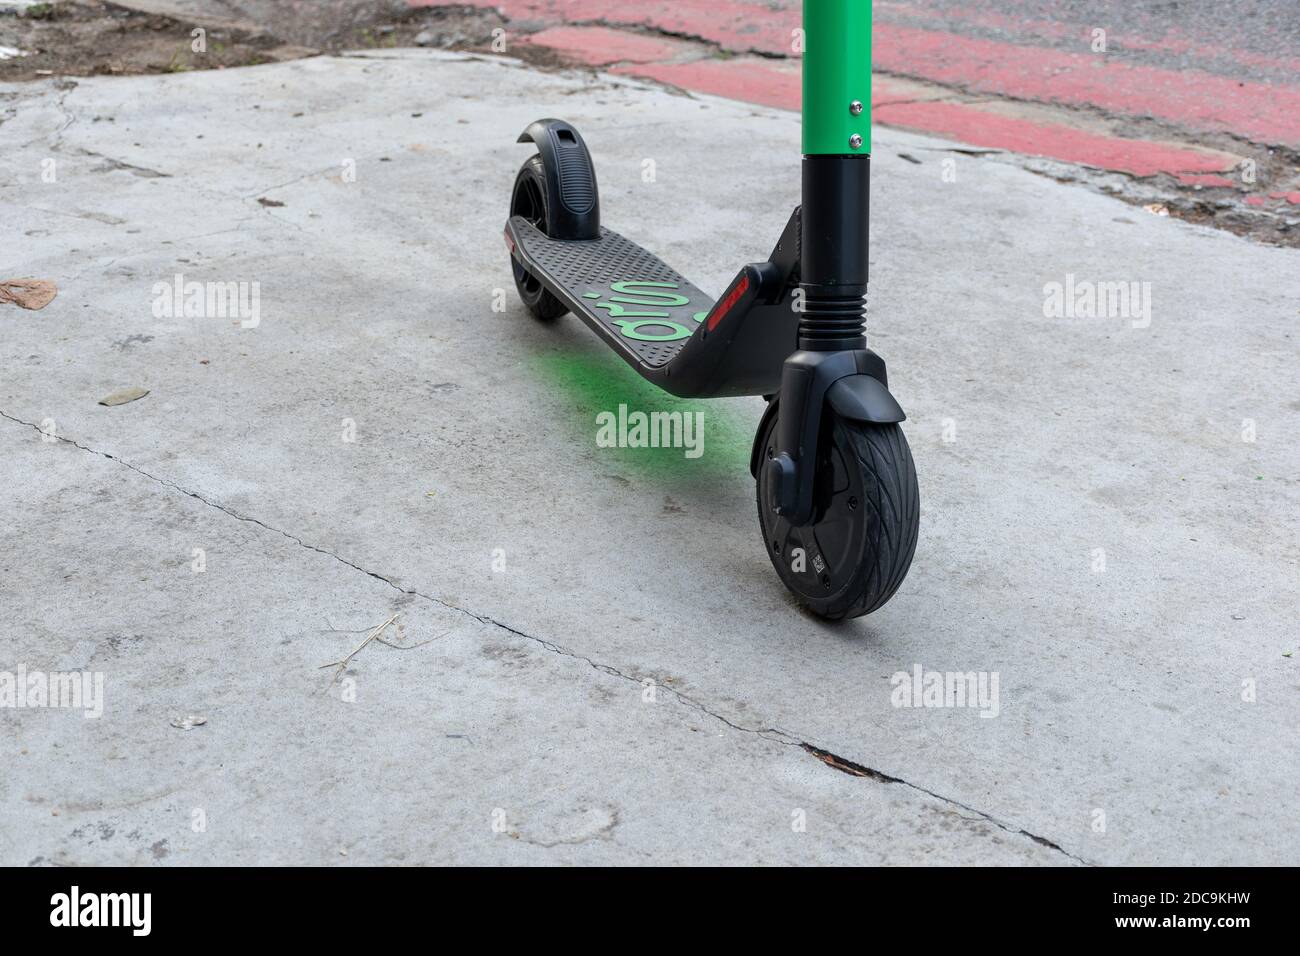 Sao Paulo, Sao Paulo/Brazil, on march 24, 2019: Close-up of a green  electric scooter on the sidewalk of Artur de Azevedo Street, in the  Pinheiros neig Stock Photo - Alamy